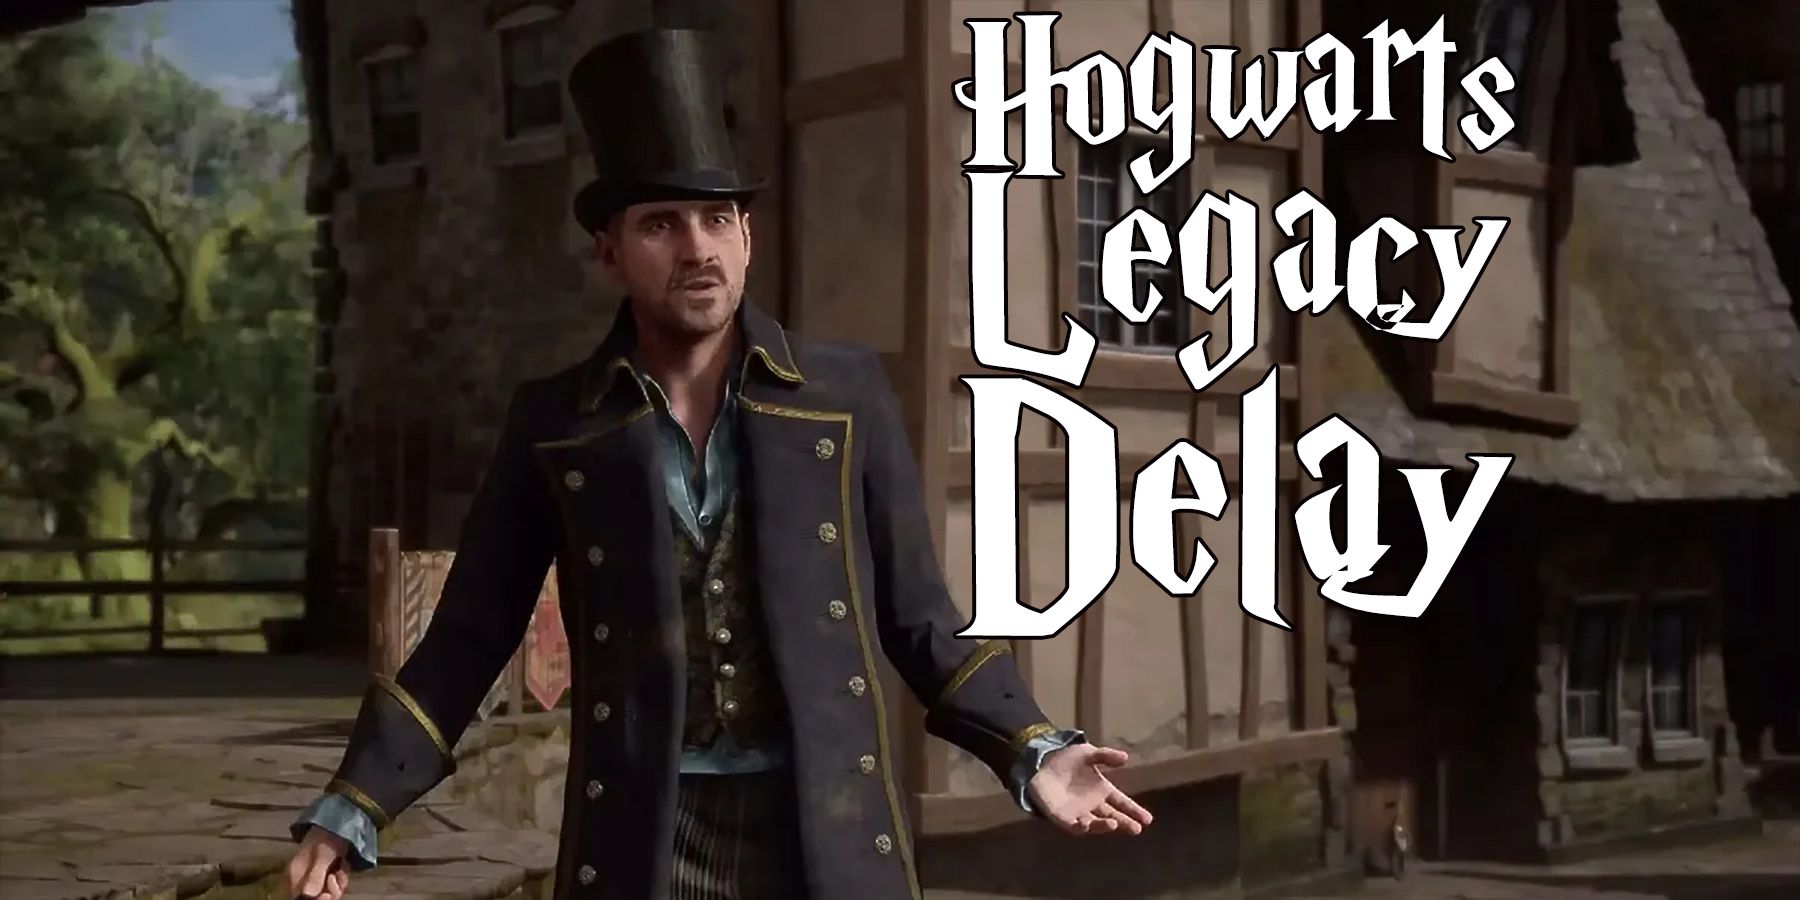 Hogwarts Legacy release date on Xbox One, PlayStation 4 delayed